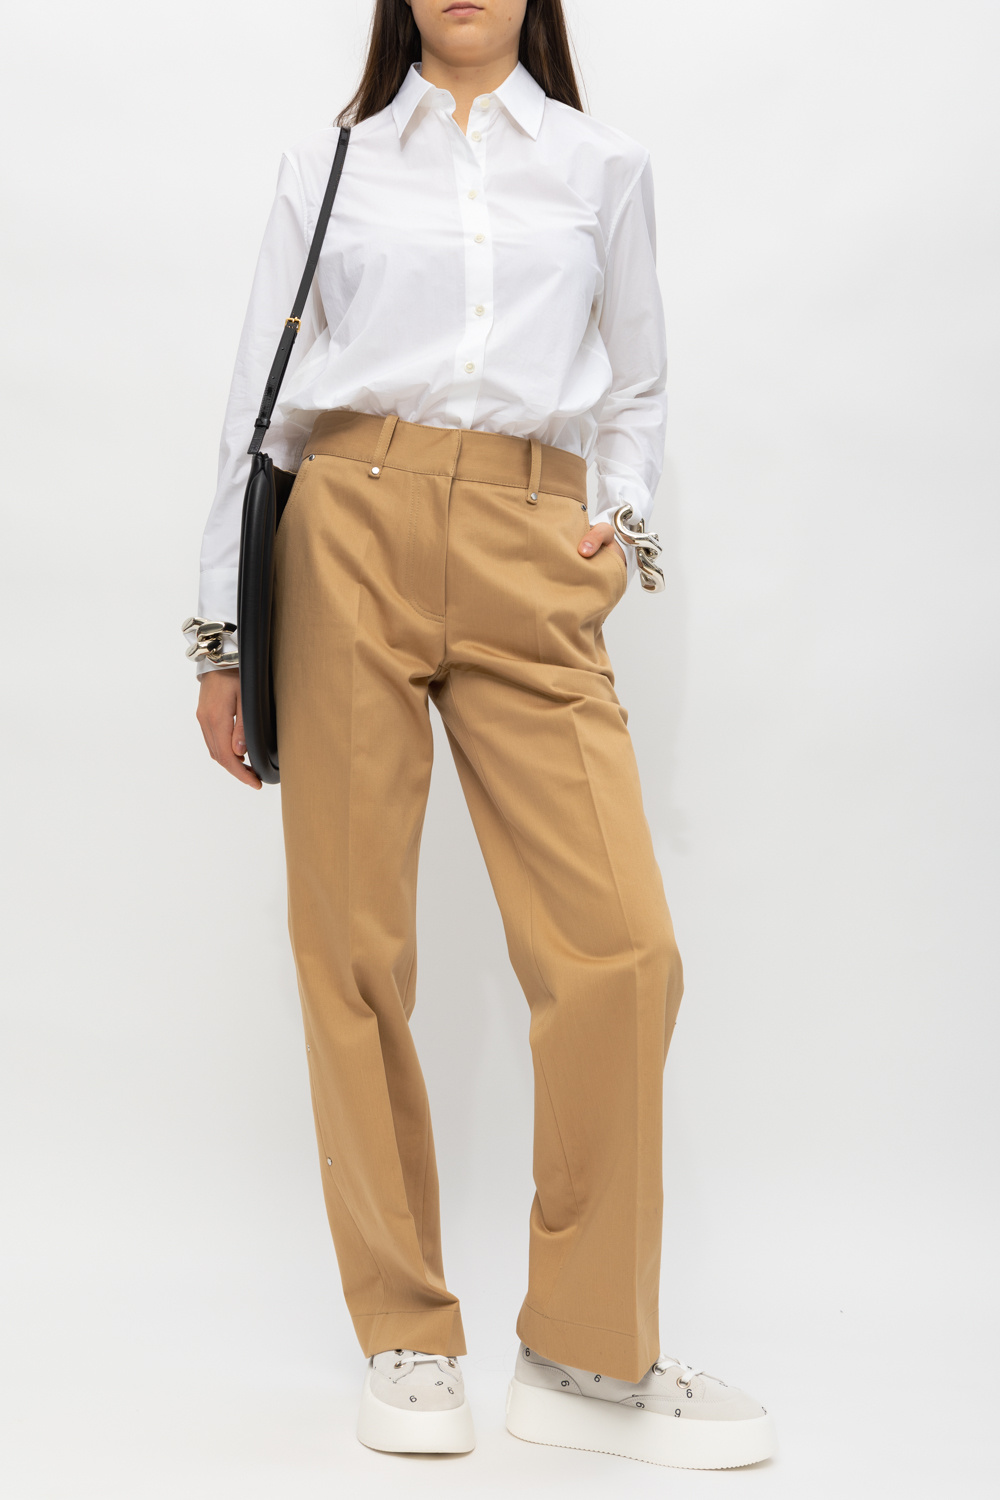 JW Anderson Pleat-front Dolce trousers